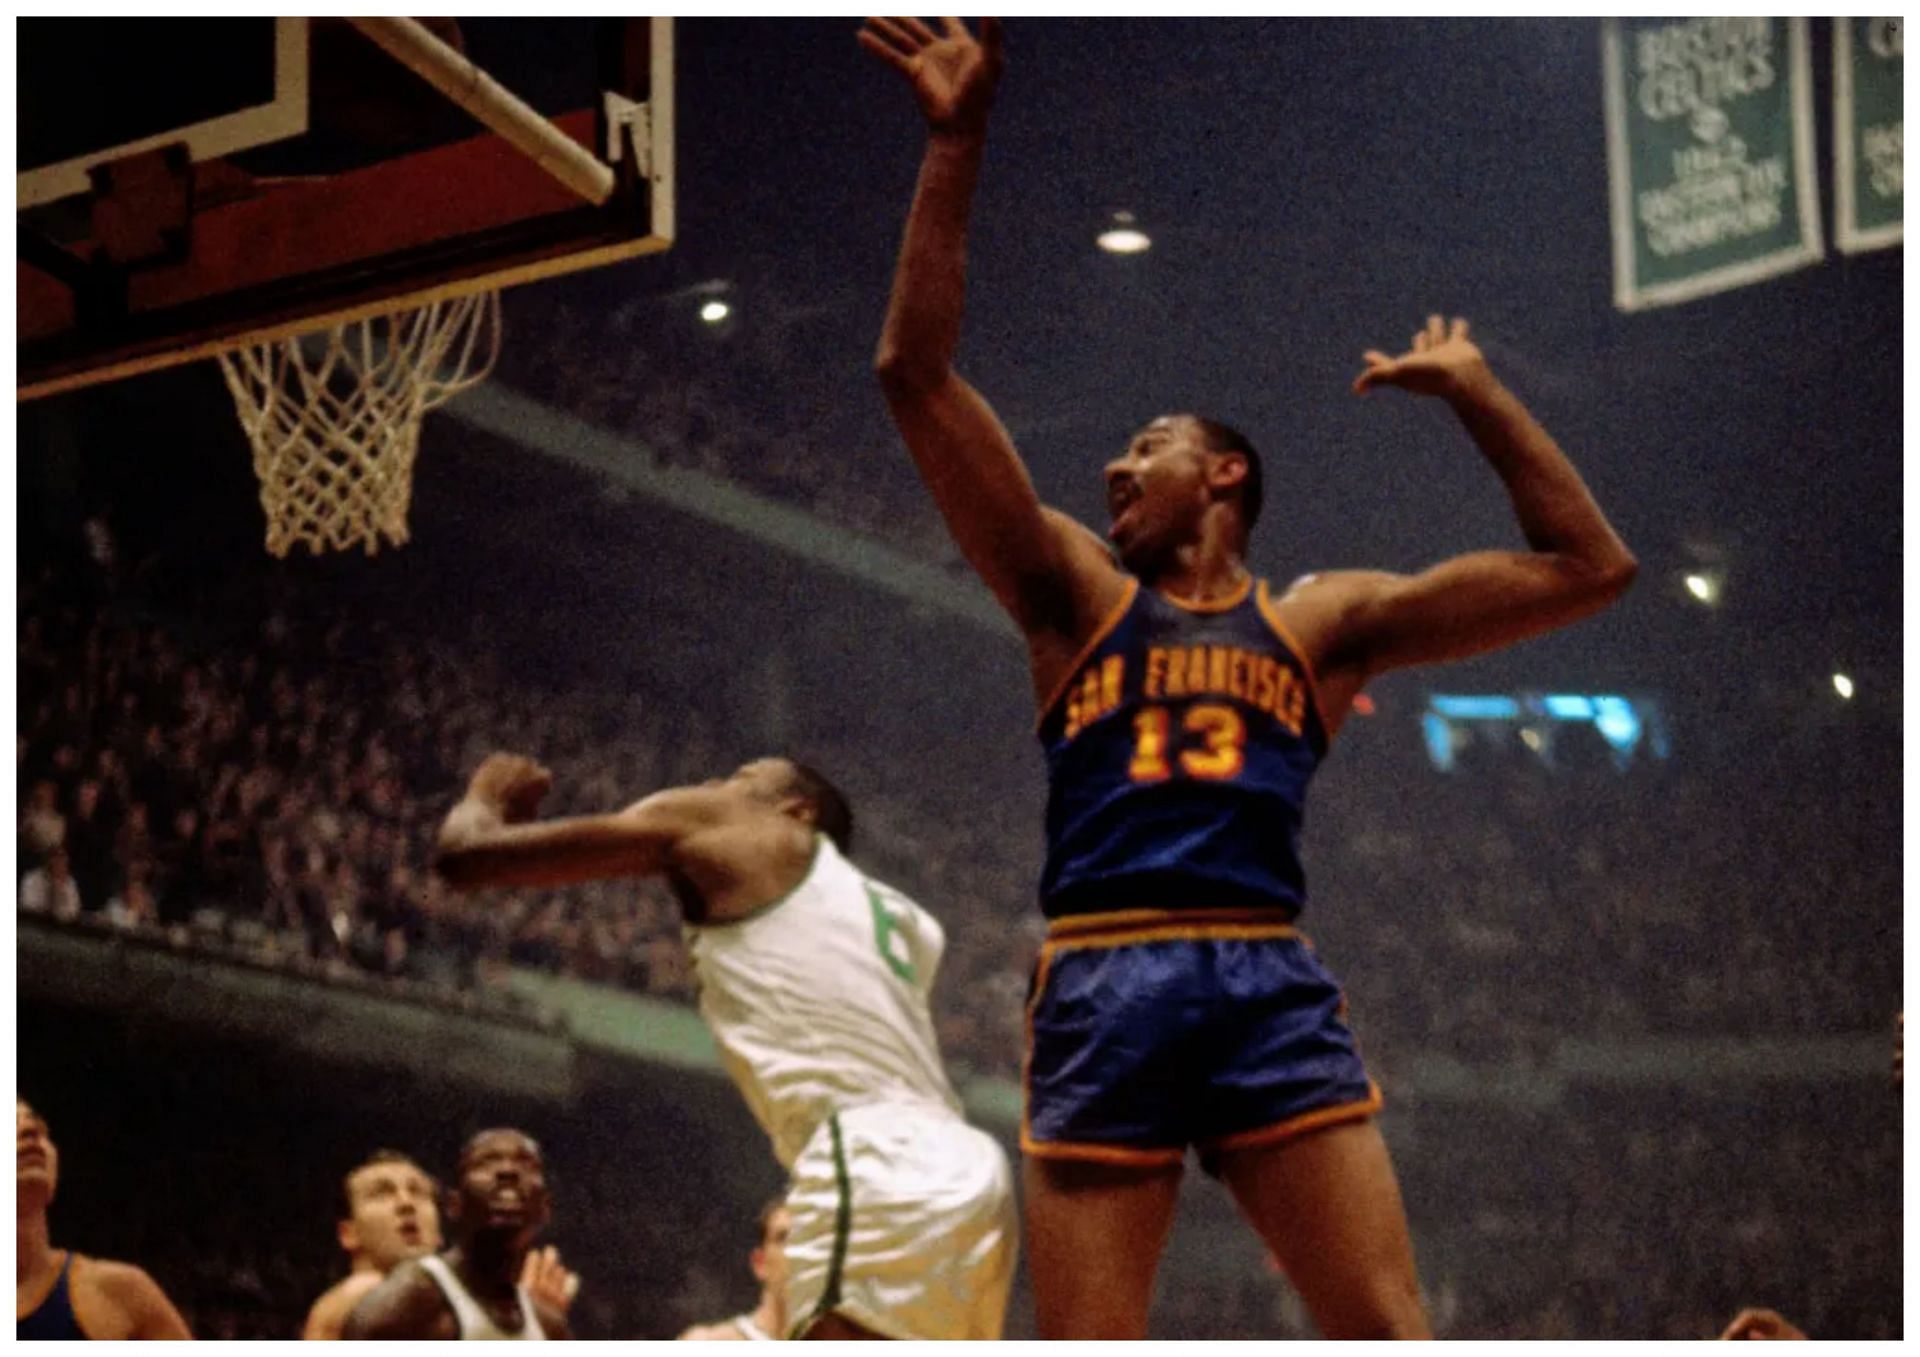 Wilt Chamberlain (right) holds the record for most points scored with 100 (Photo credit: Dick Raphael/NBAE via Getty Images)